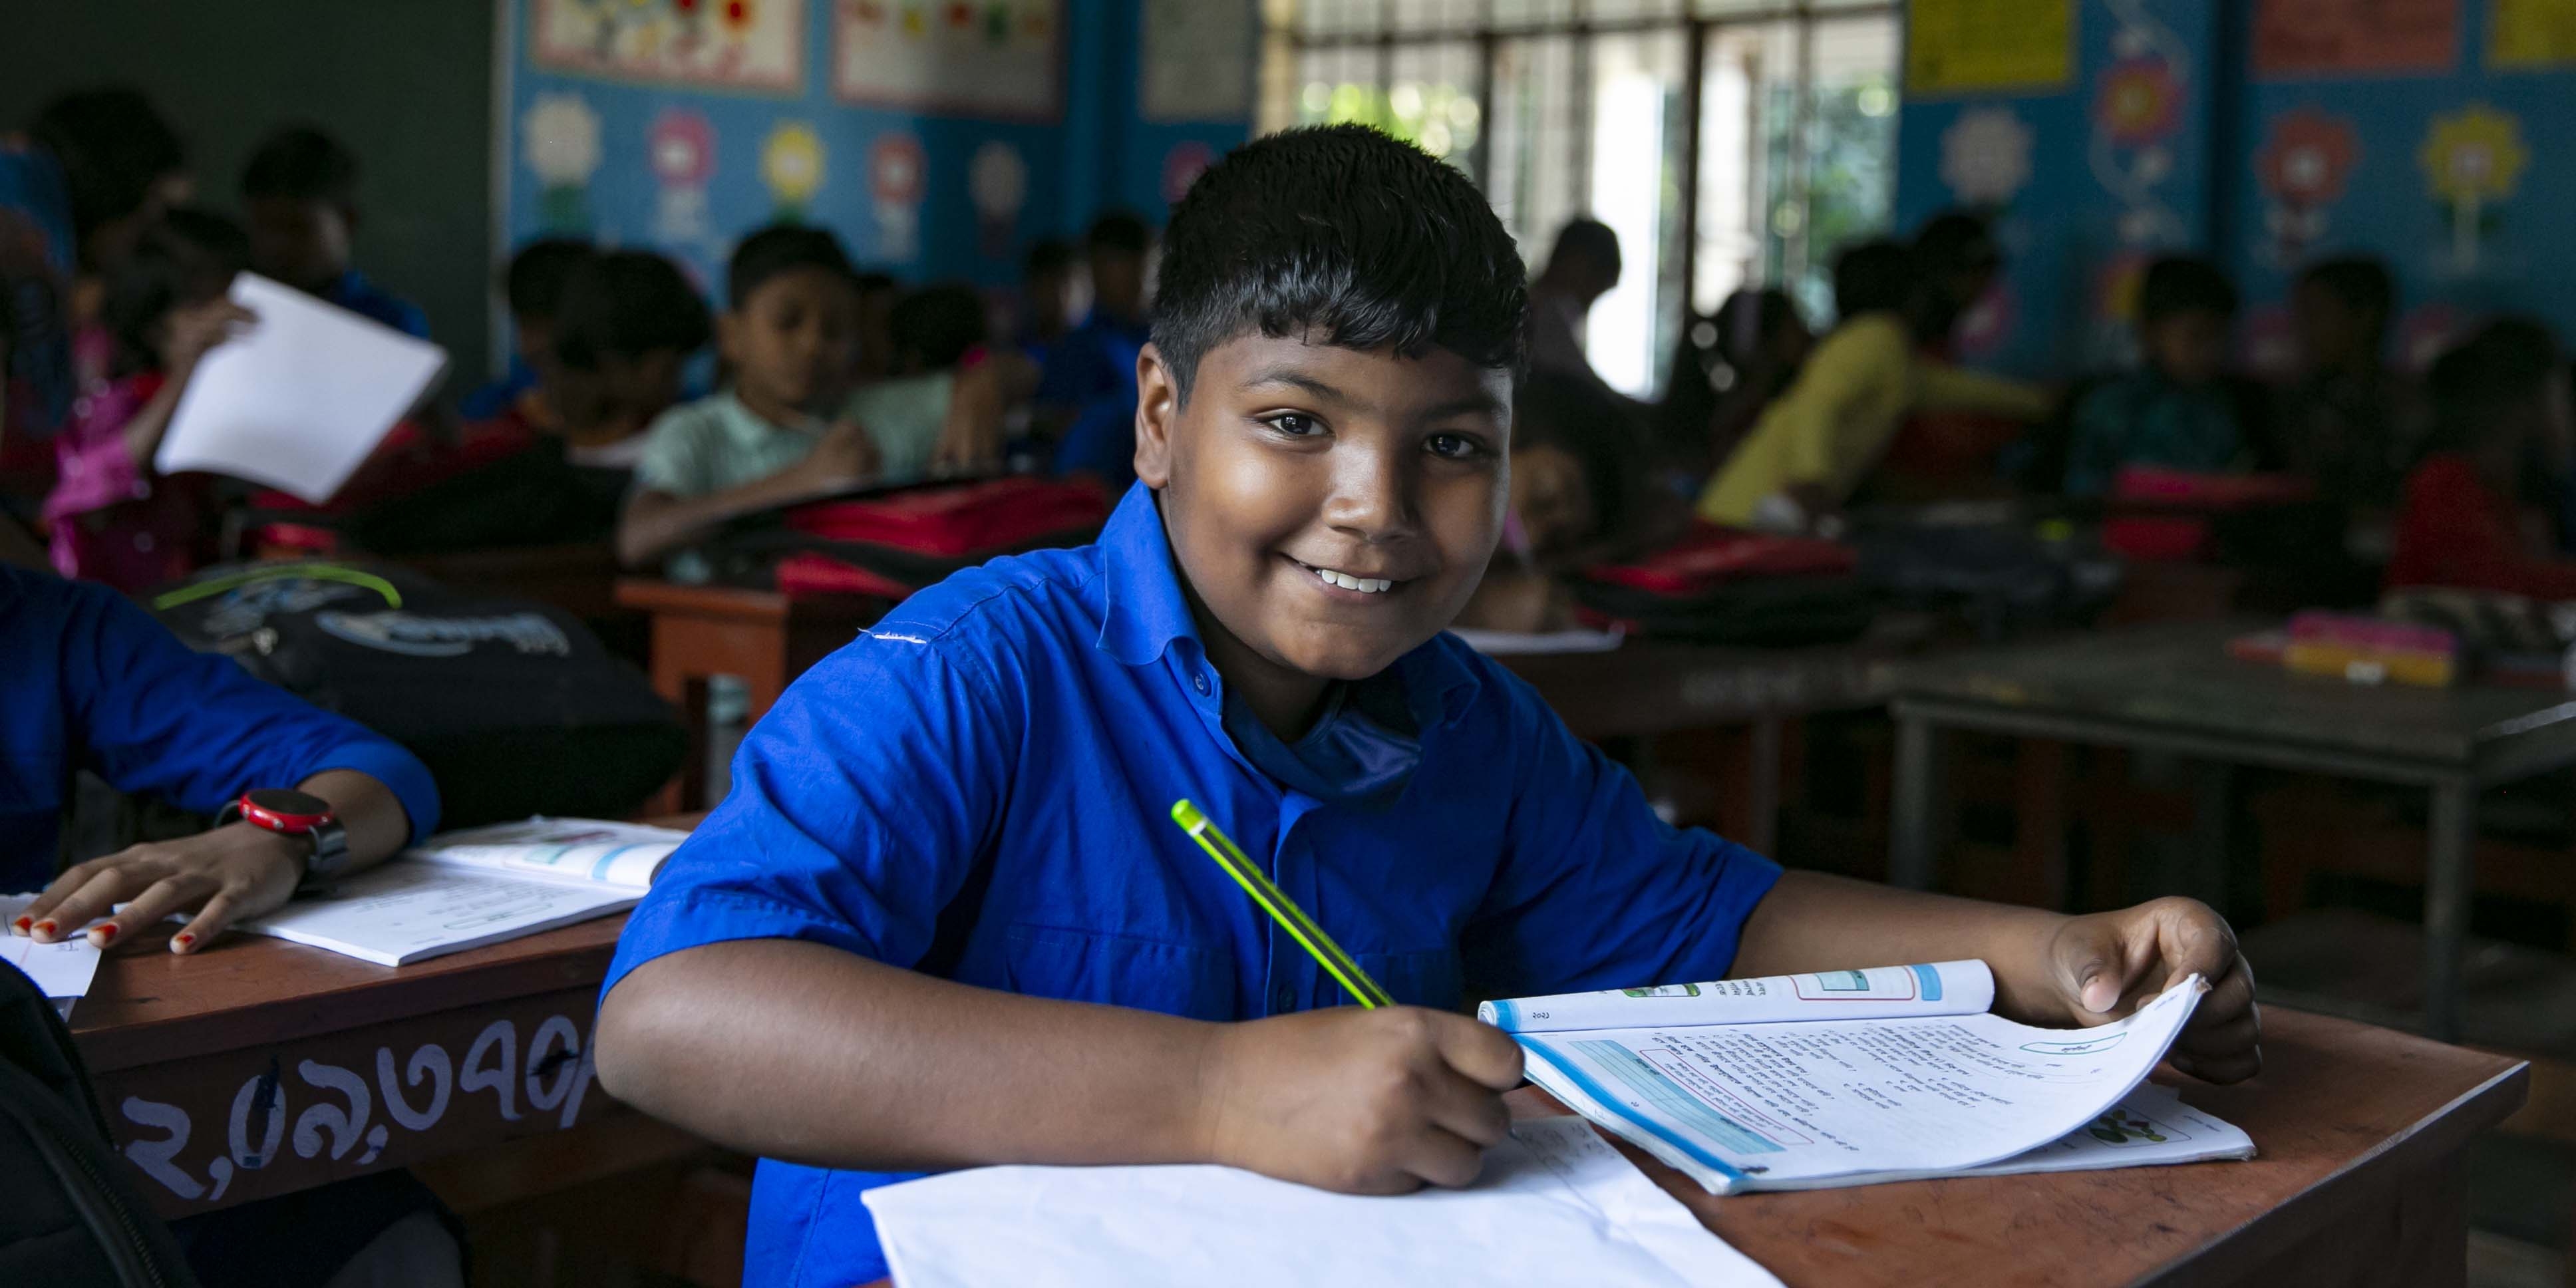 A boy from Bangladesh smiles at the camera while doing school work